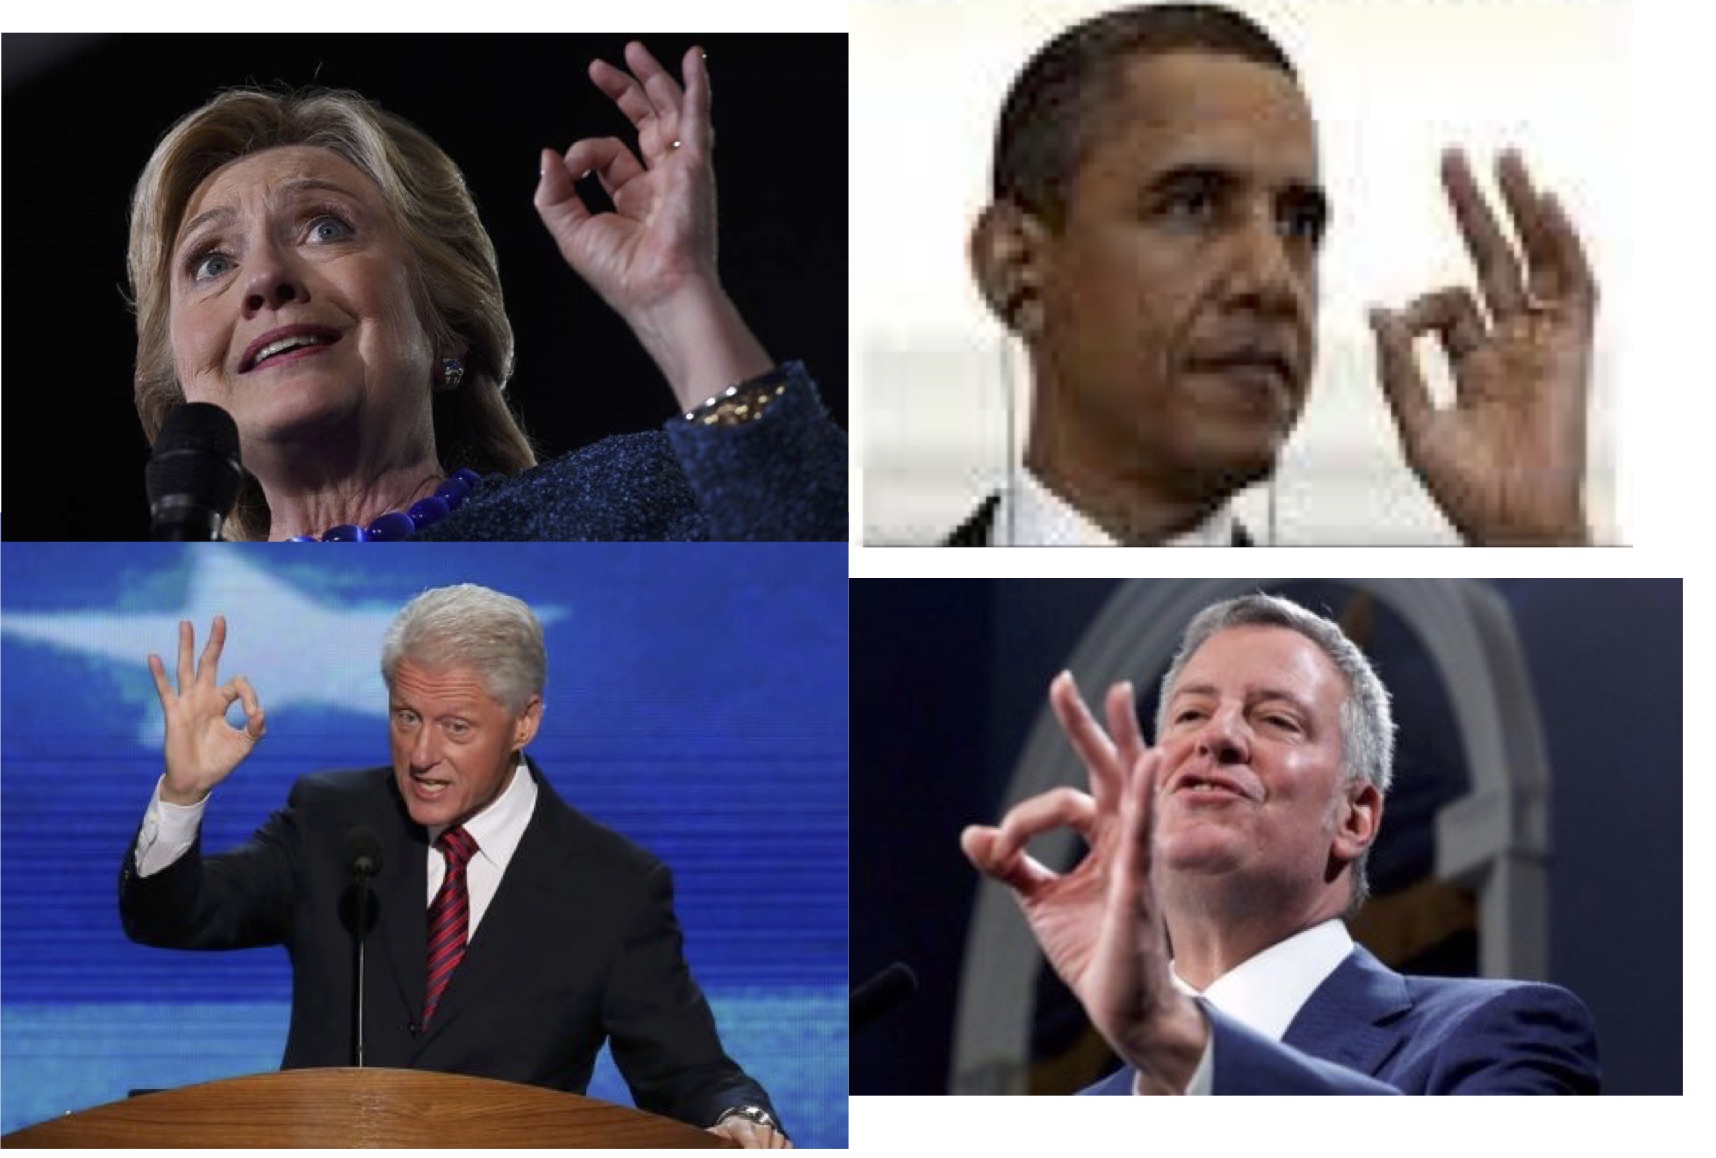 2018 - Democrats flashing the White Power sign